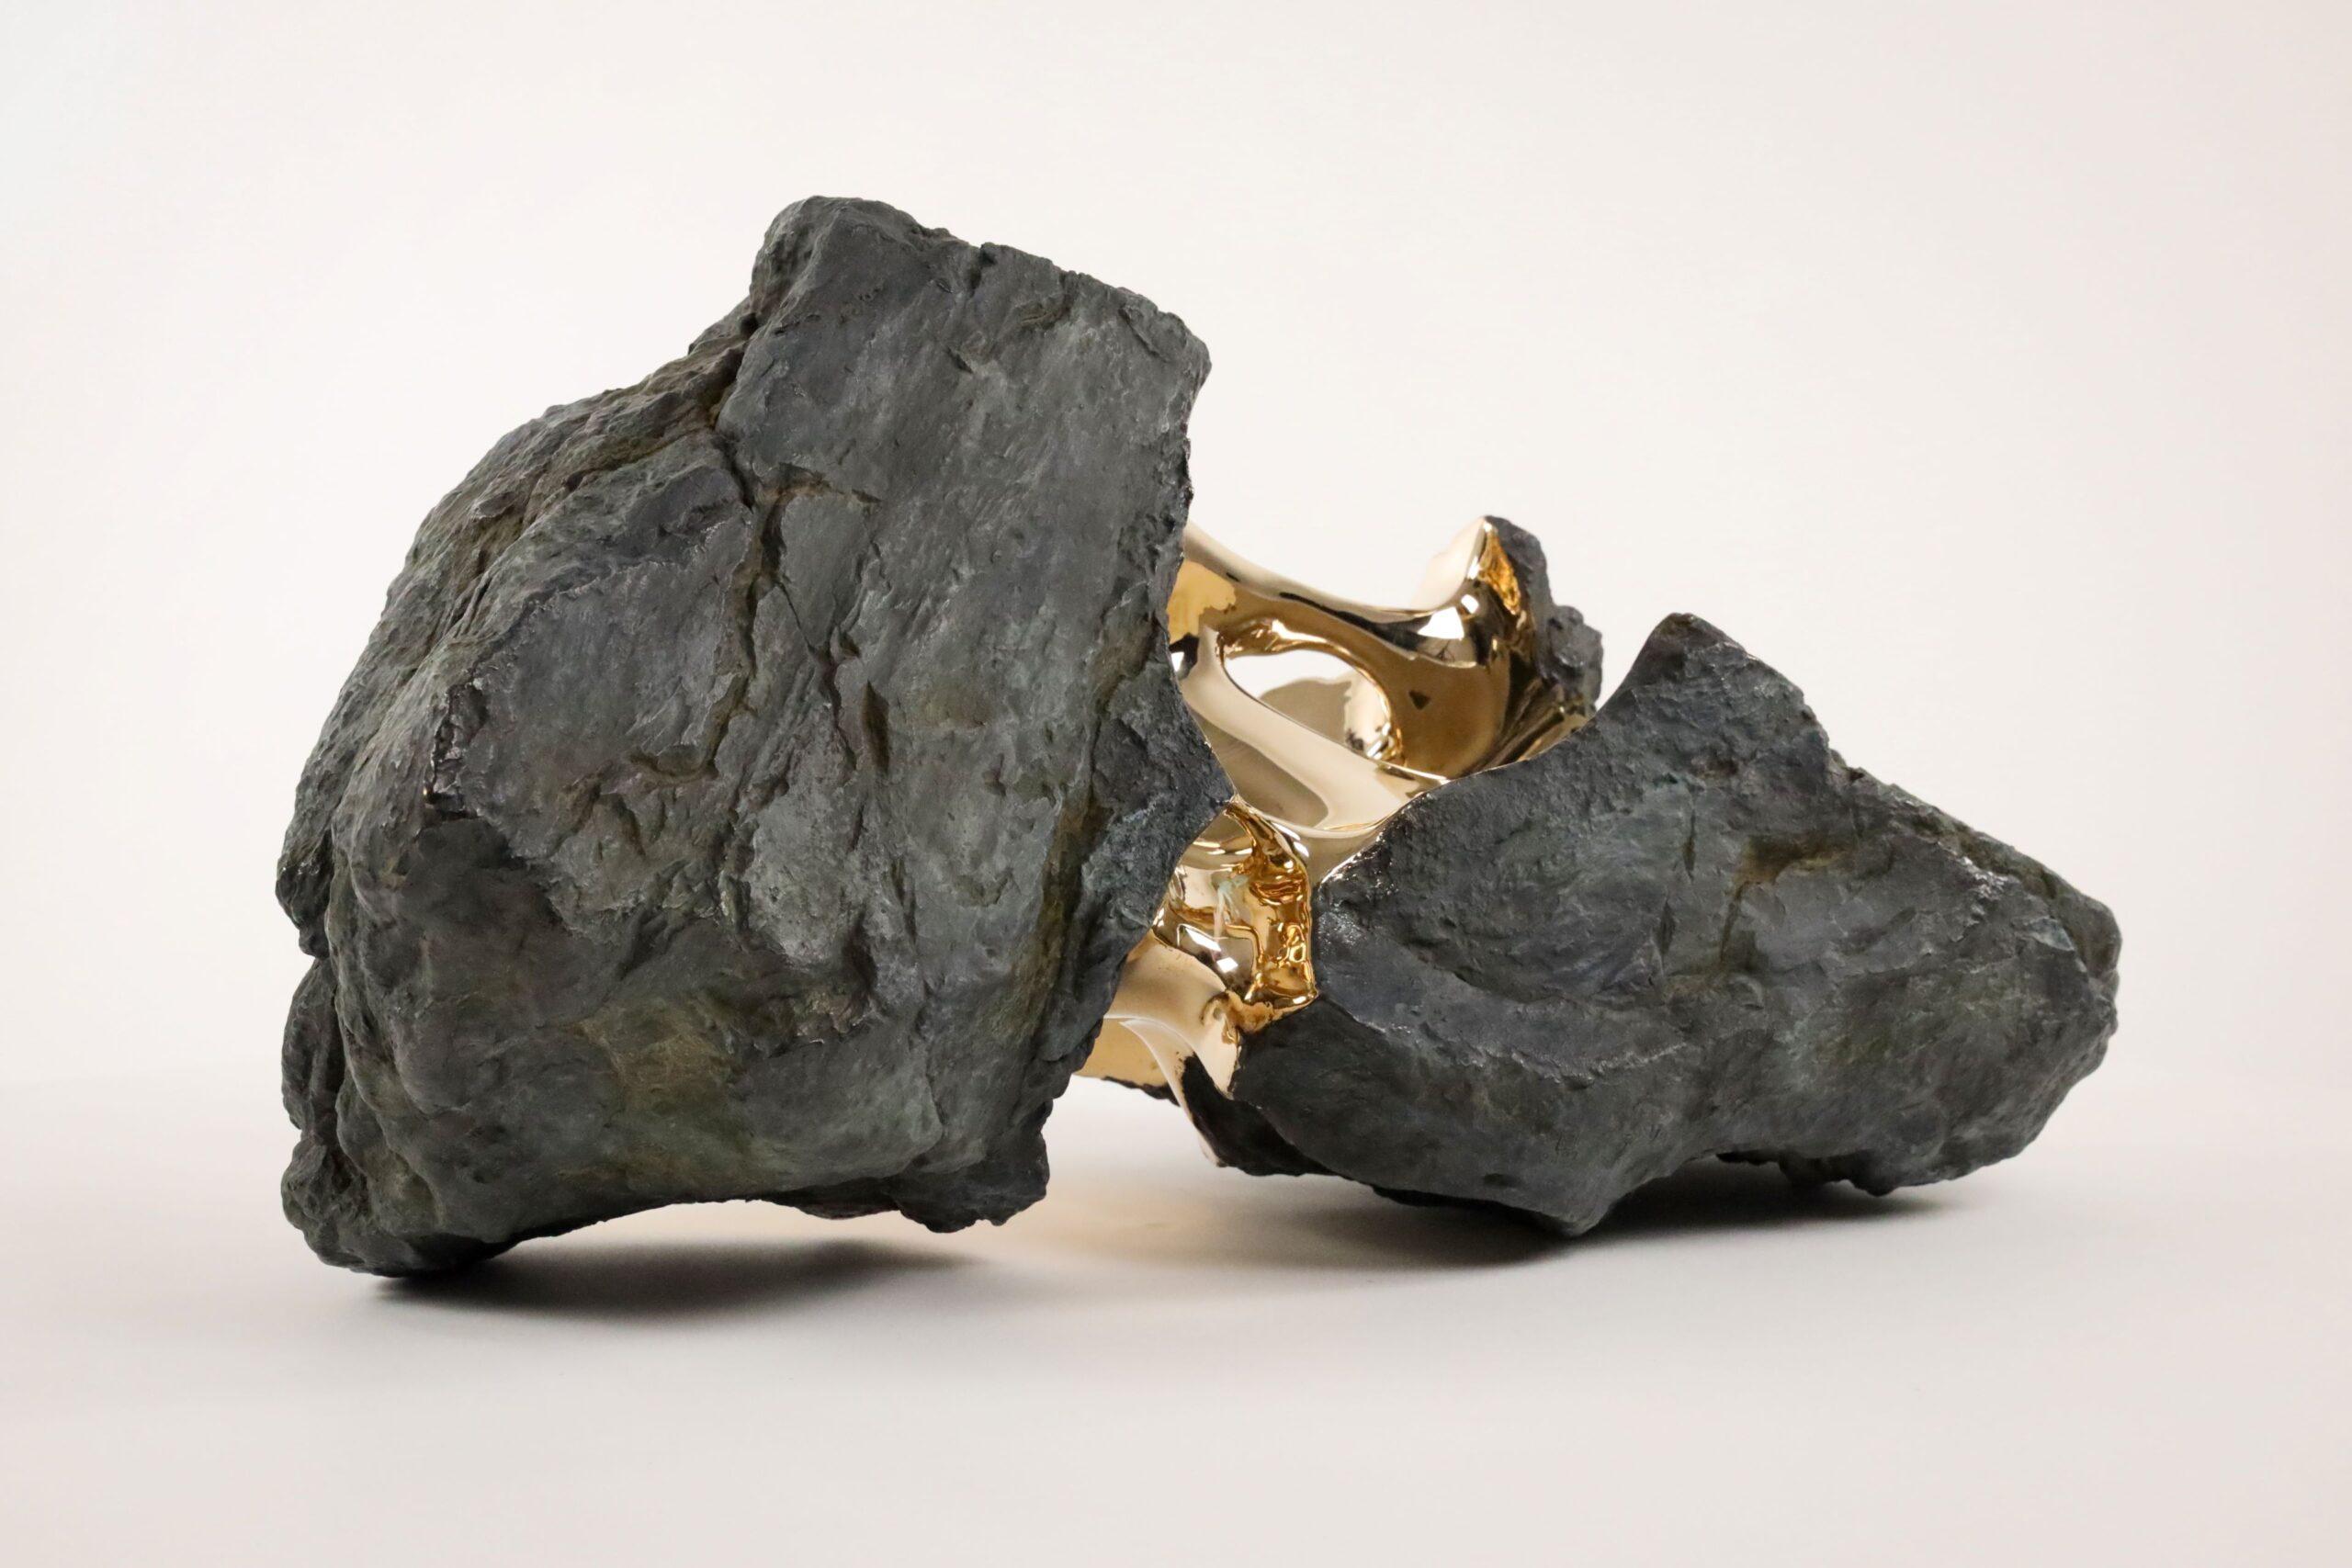 Kairos by Romain Langlois - Rock-like bronze sculpture, golden, abstract For Sale 8